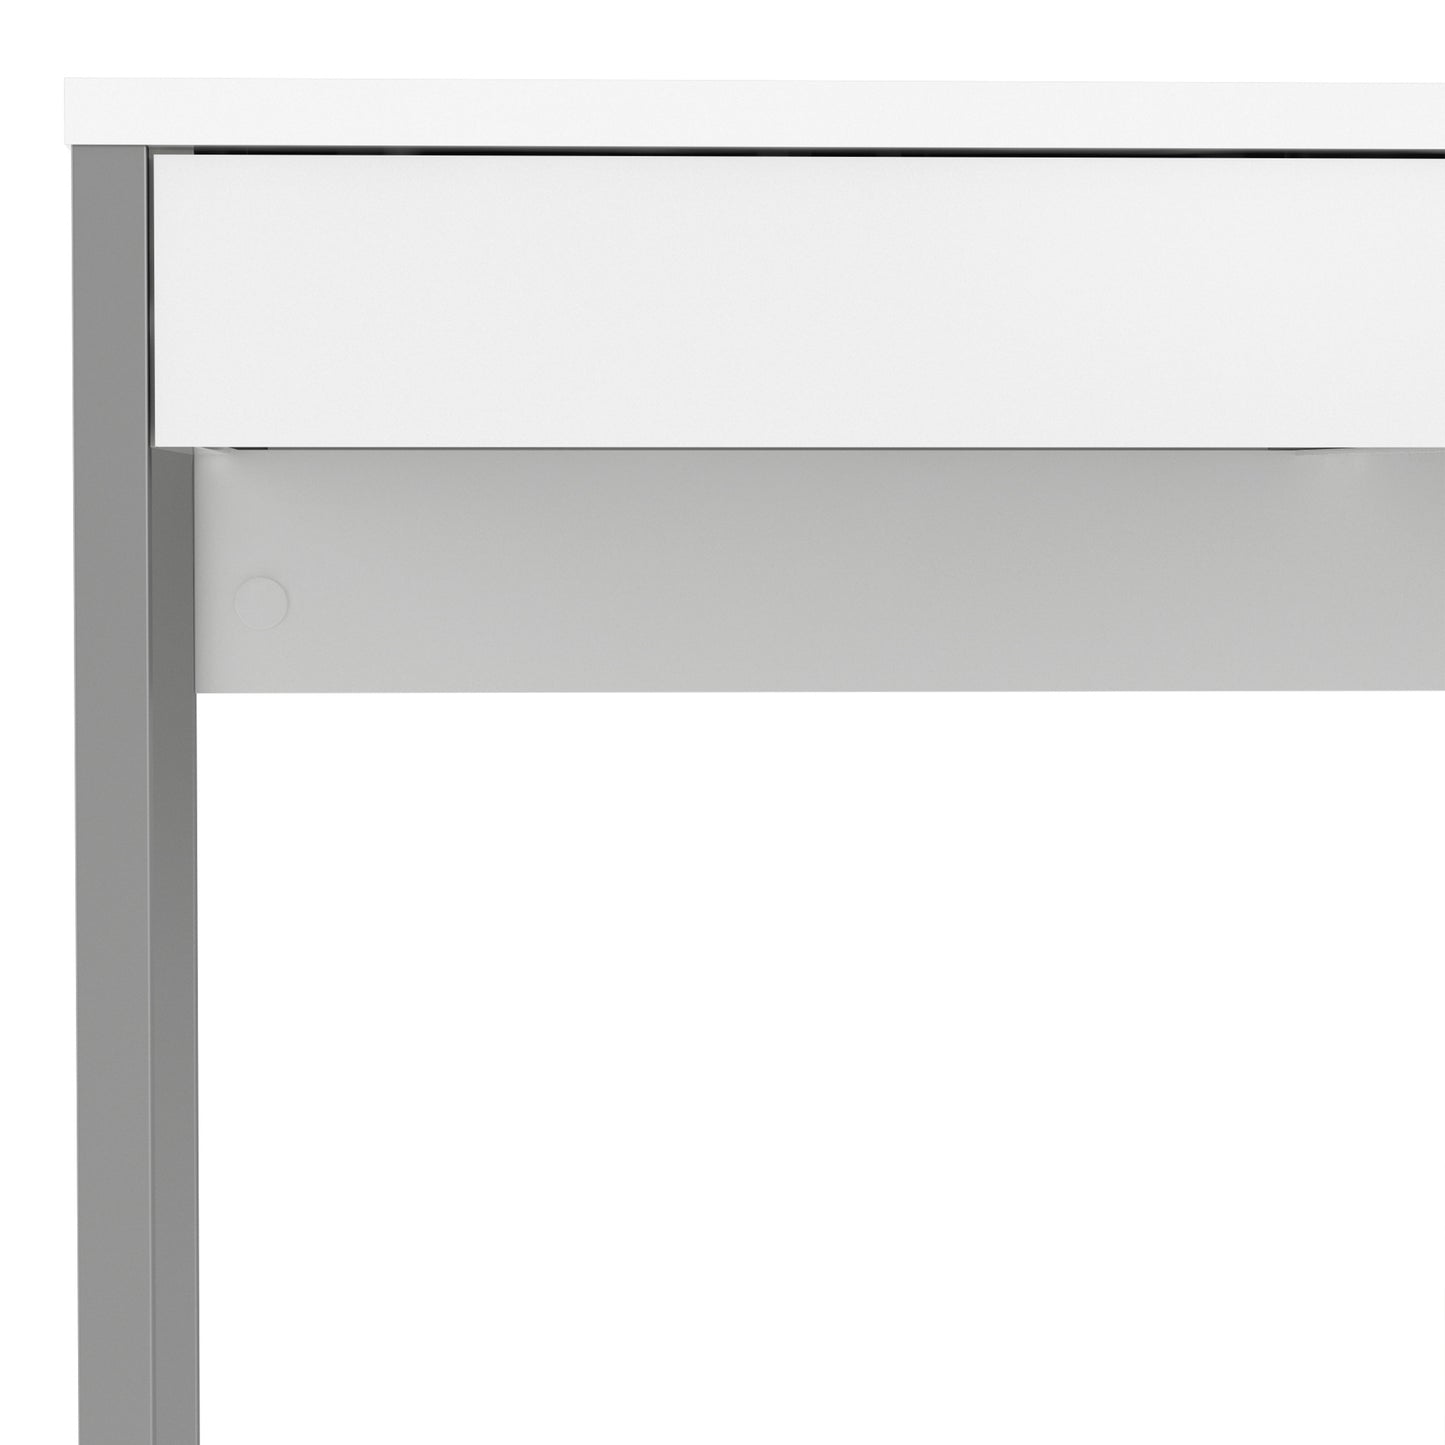 Function Plus  Desk 2 Drawers in White High Gloss